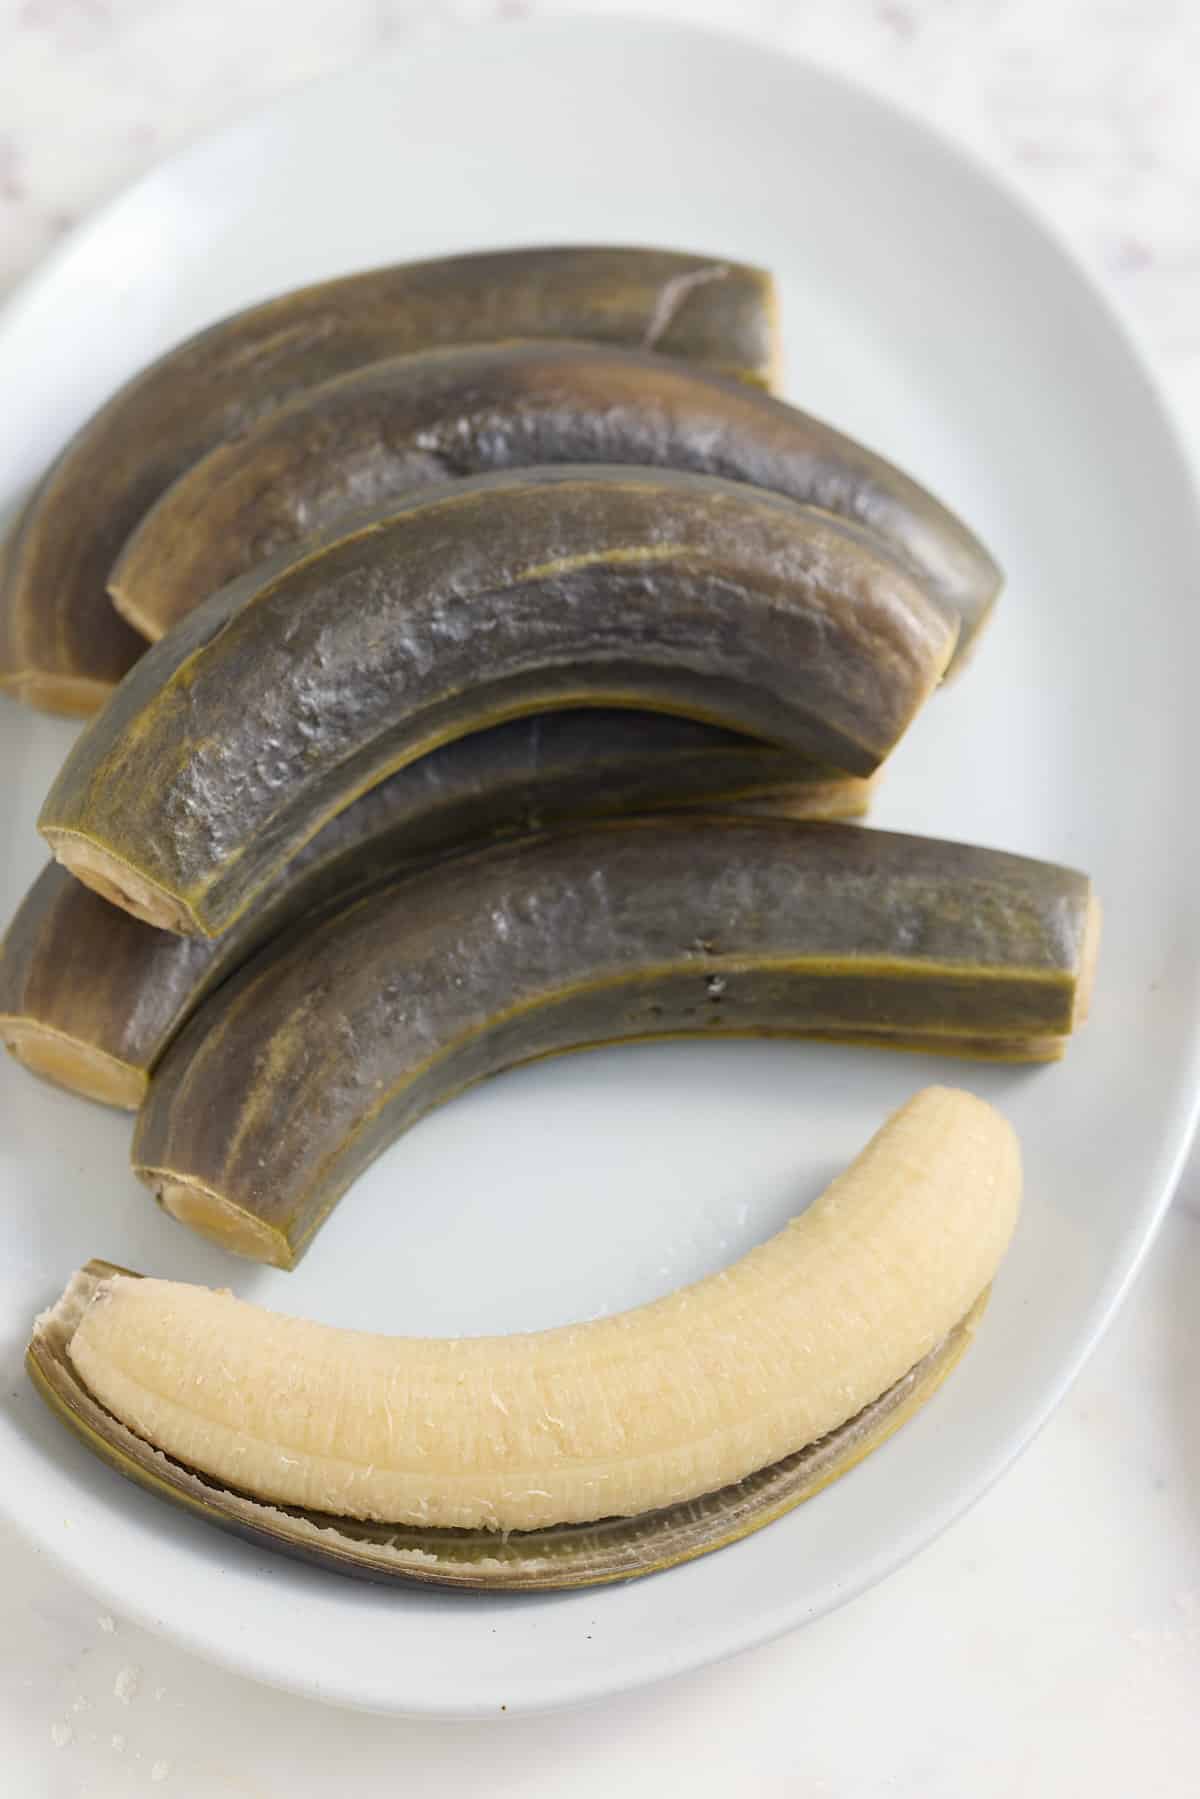 boiled green banana with one peeled on white plate